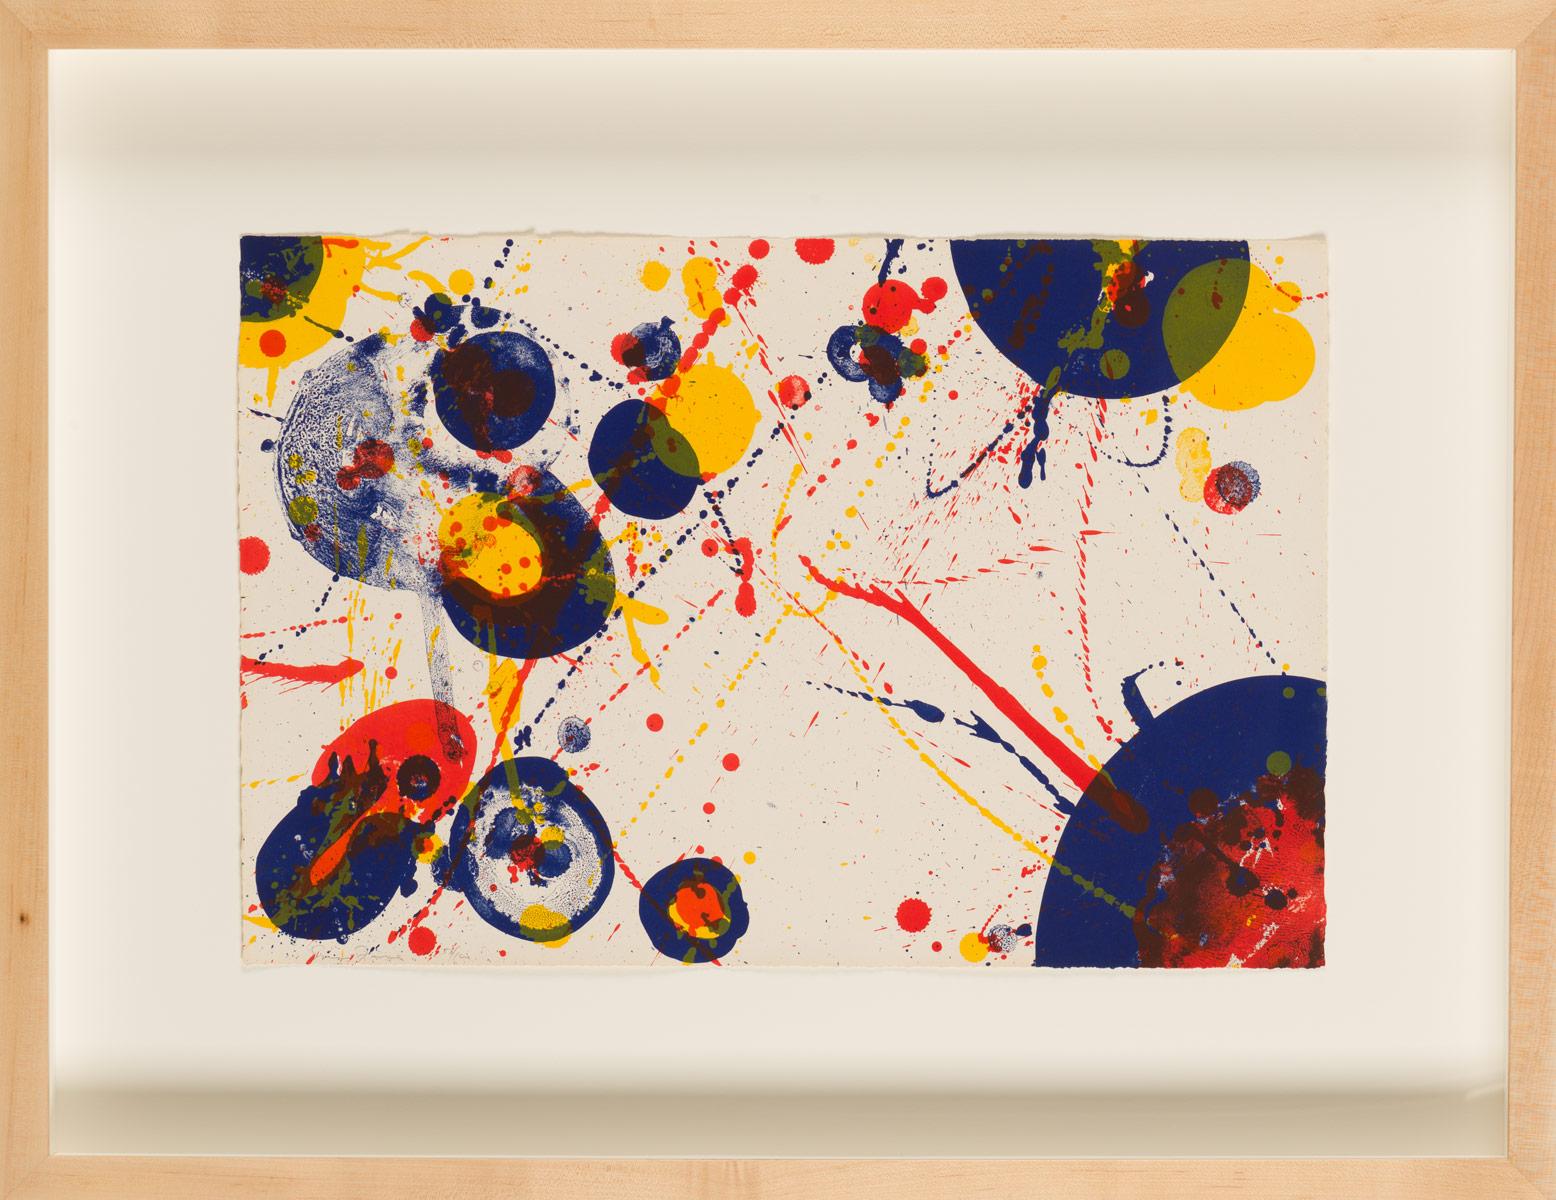 Sam Francis
"Untitled, from the Pasadena Box Set Plate 7"
Lembark 63
Lithograph in colors on Rives BFK paper, c. 1964
Signed in pencil in lower left
Impression 56 of edition of 100
Sheet size: 11 1/4" x 15"

His experiments with borders and the